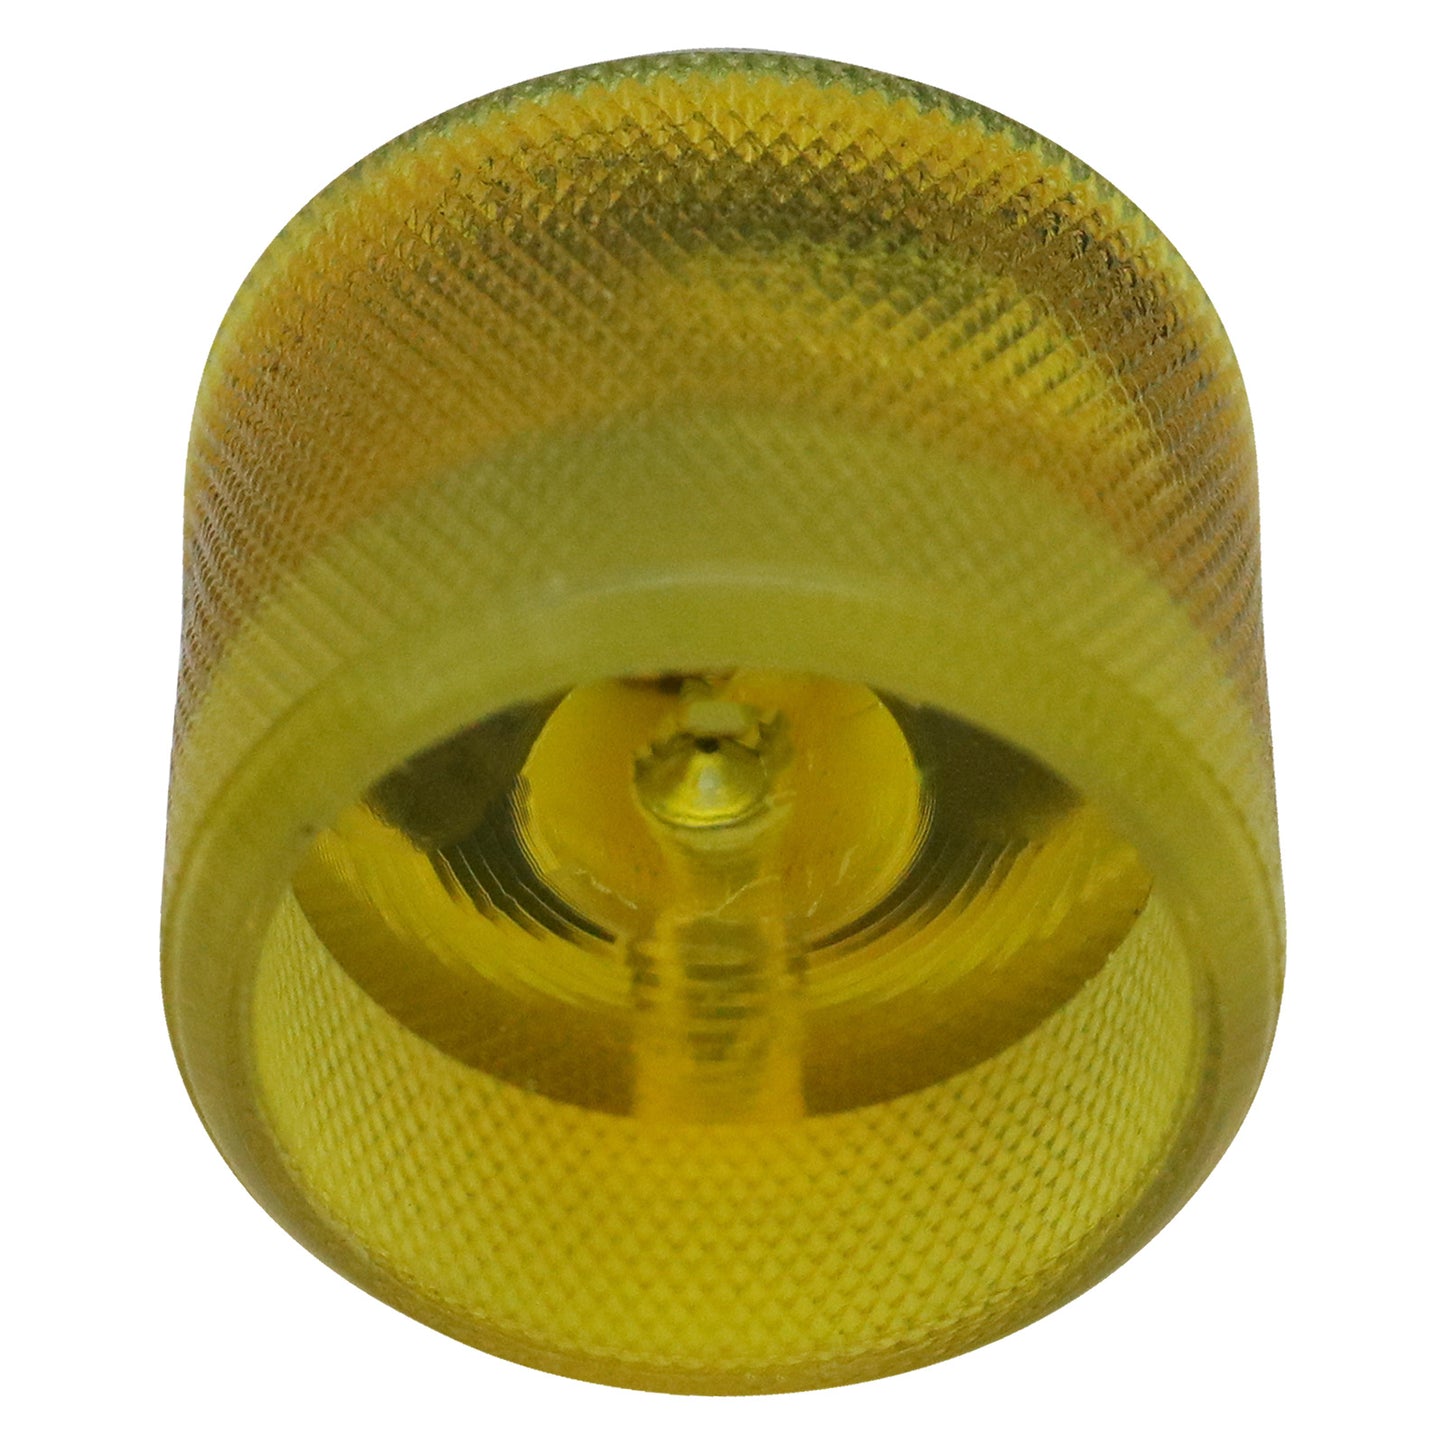 Translucent Colour Abalone Domed Top Guitar Knob